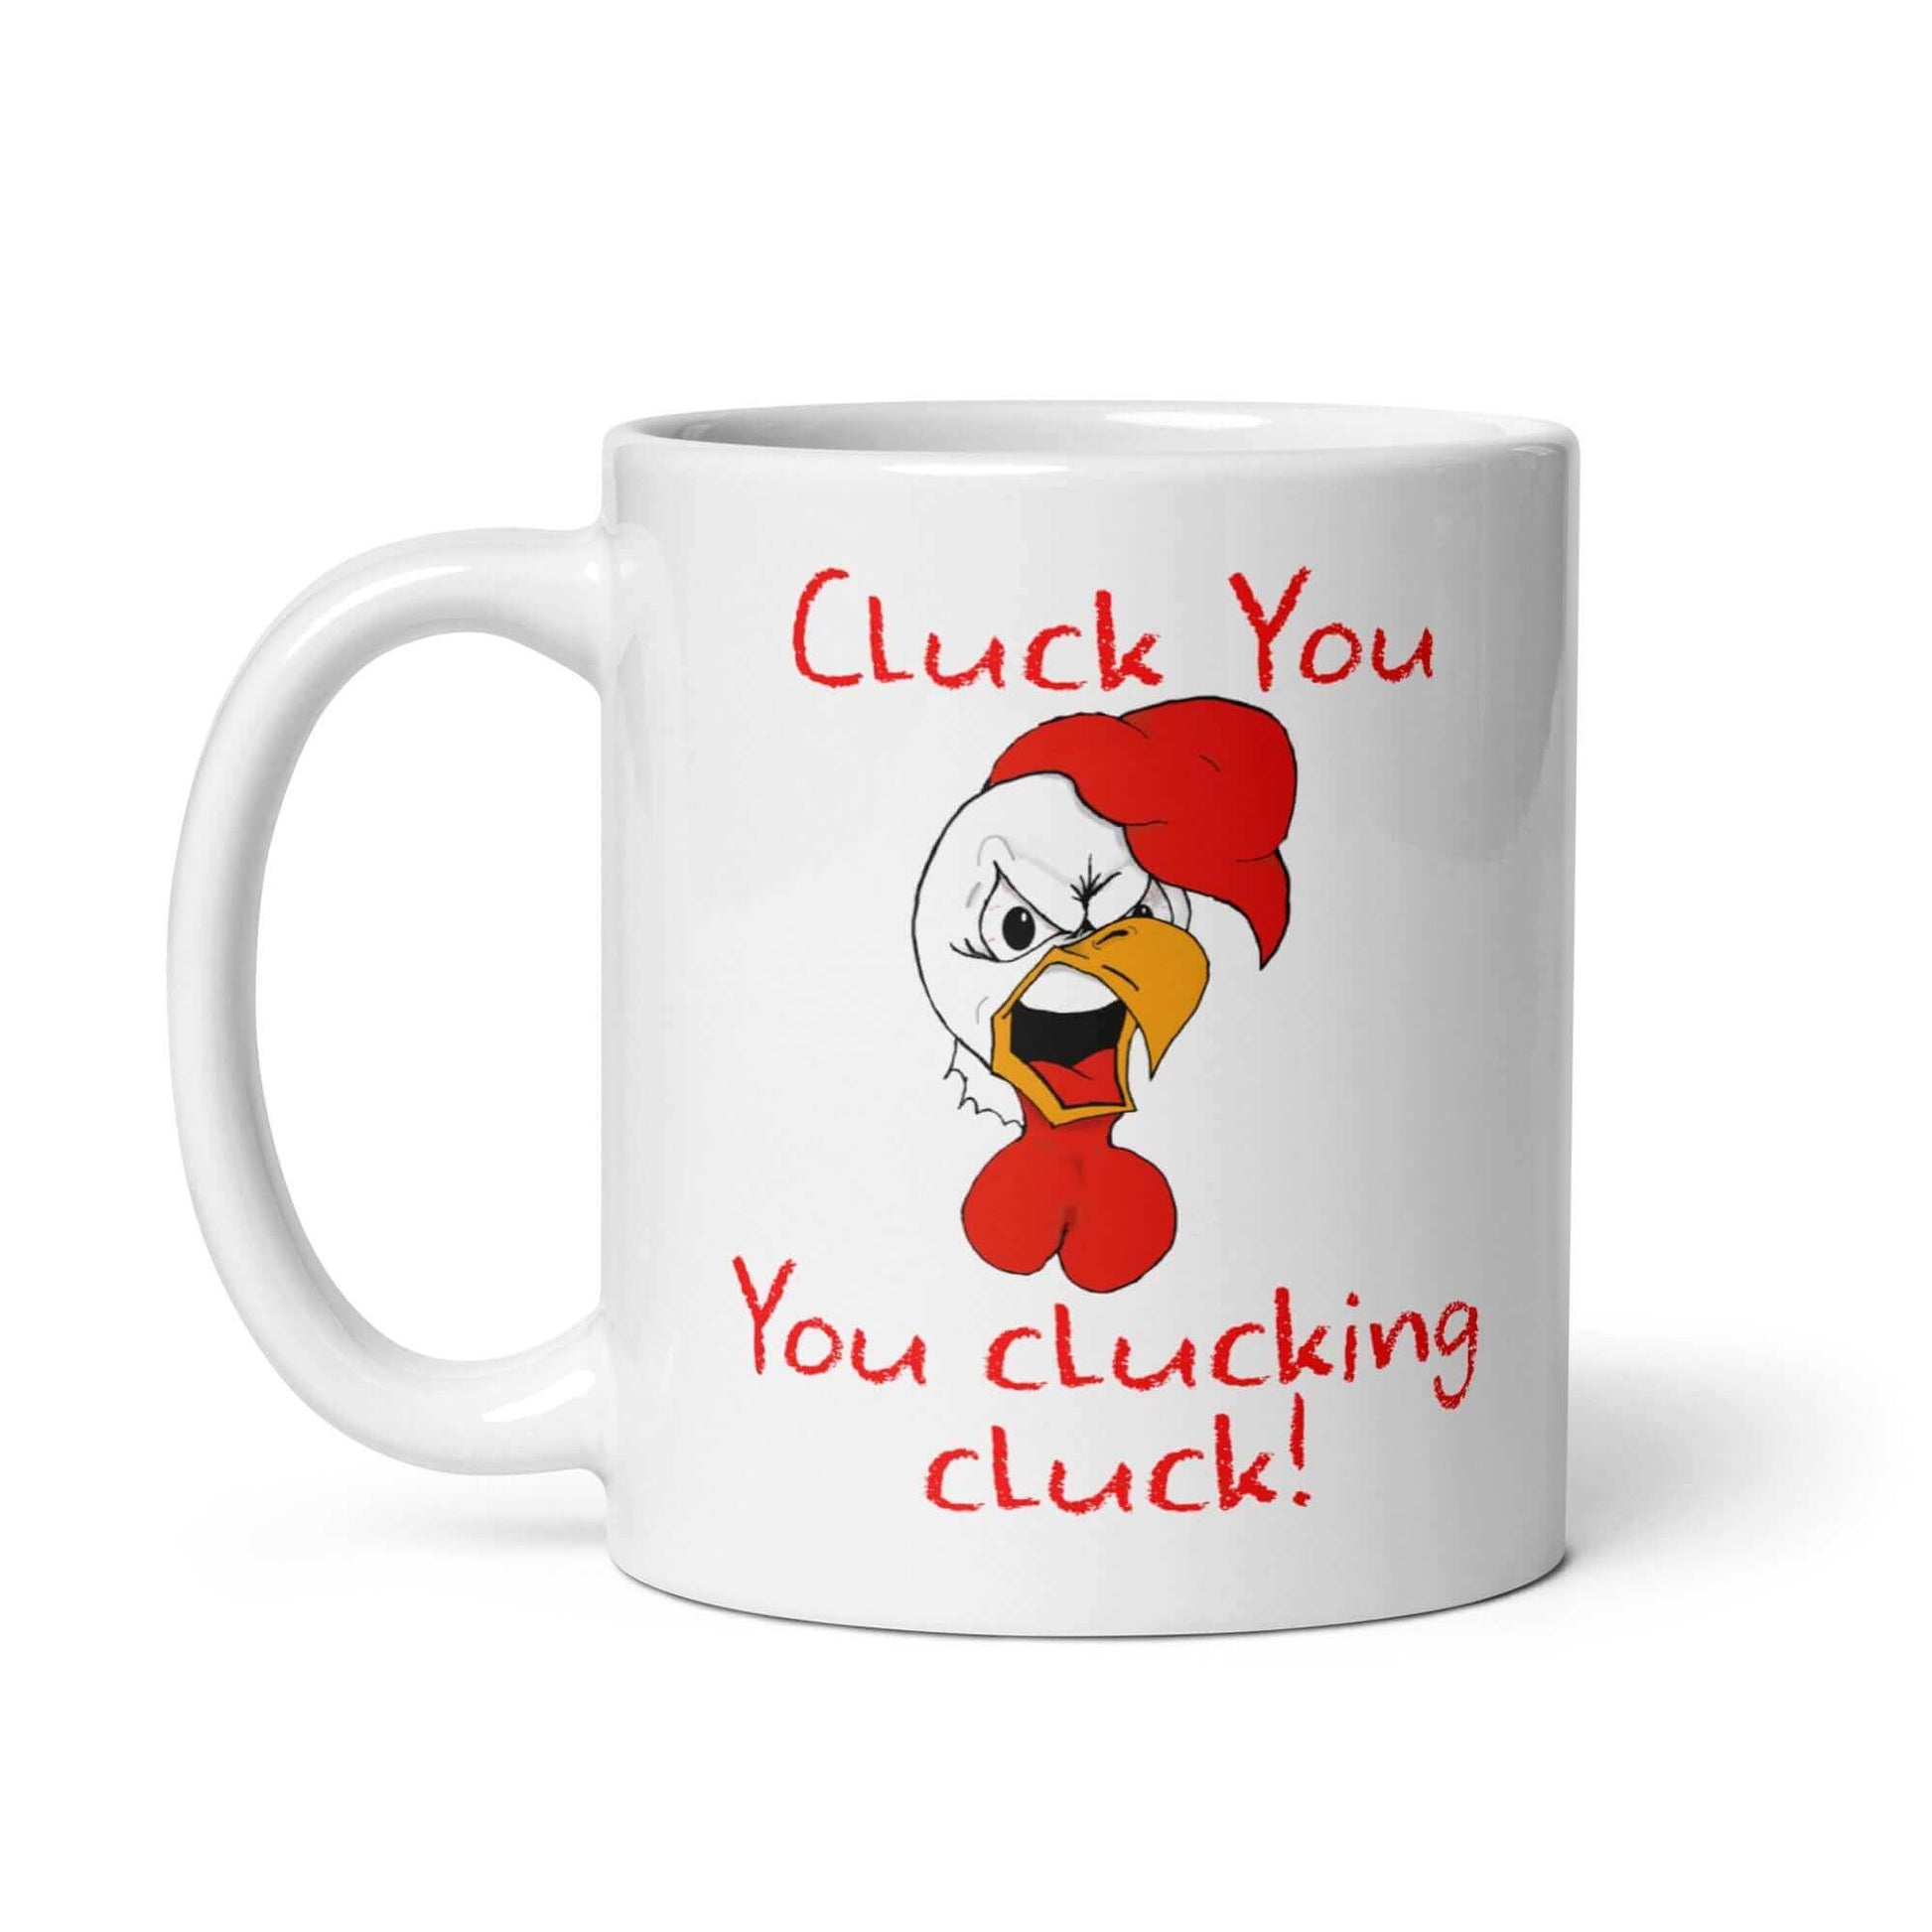 Cluck you , you clucking cluck - White glossy mug - Horrible Designs